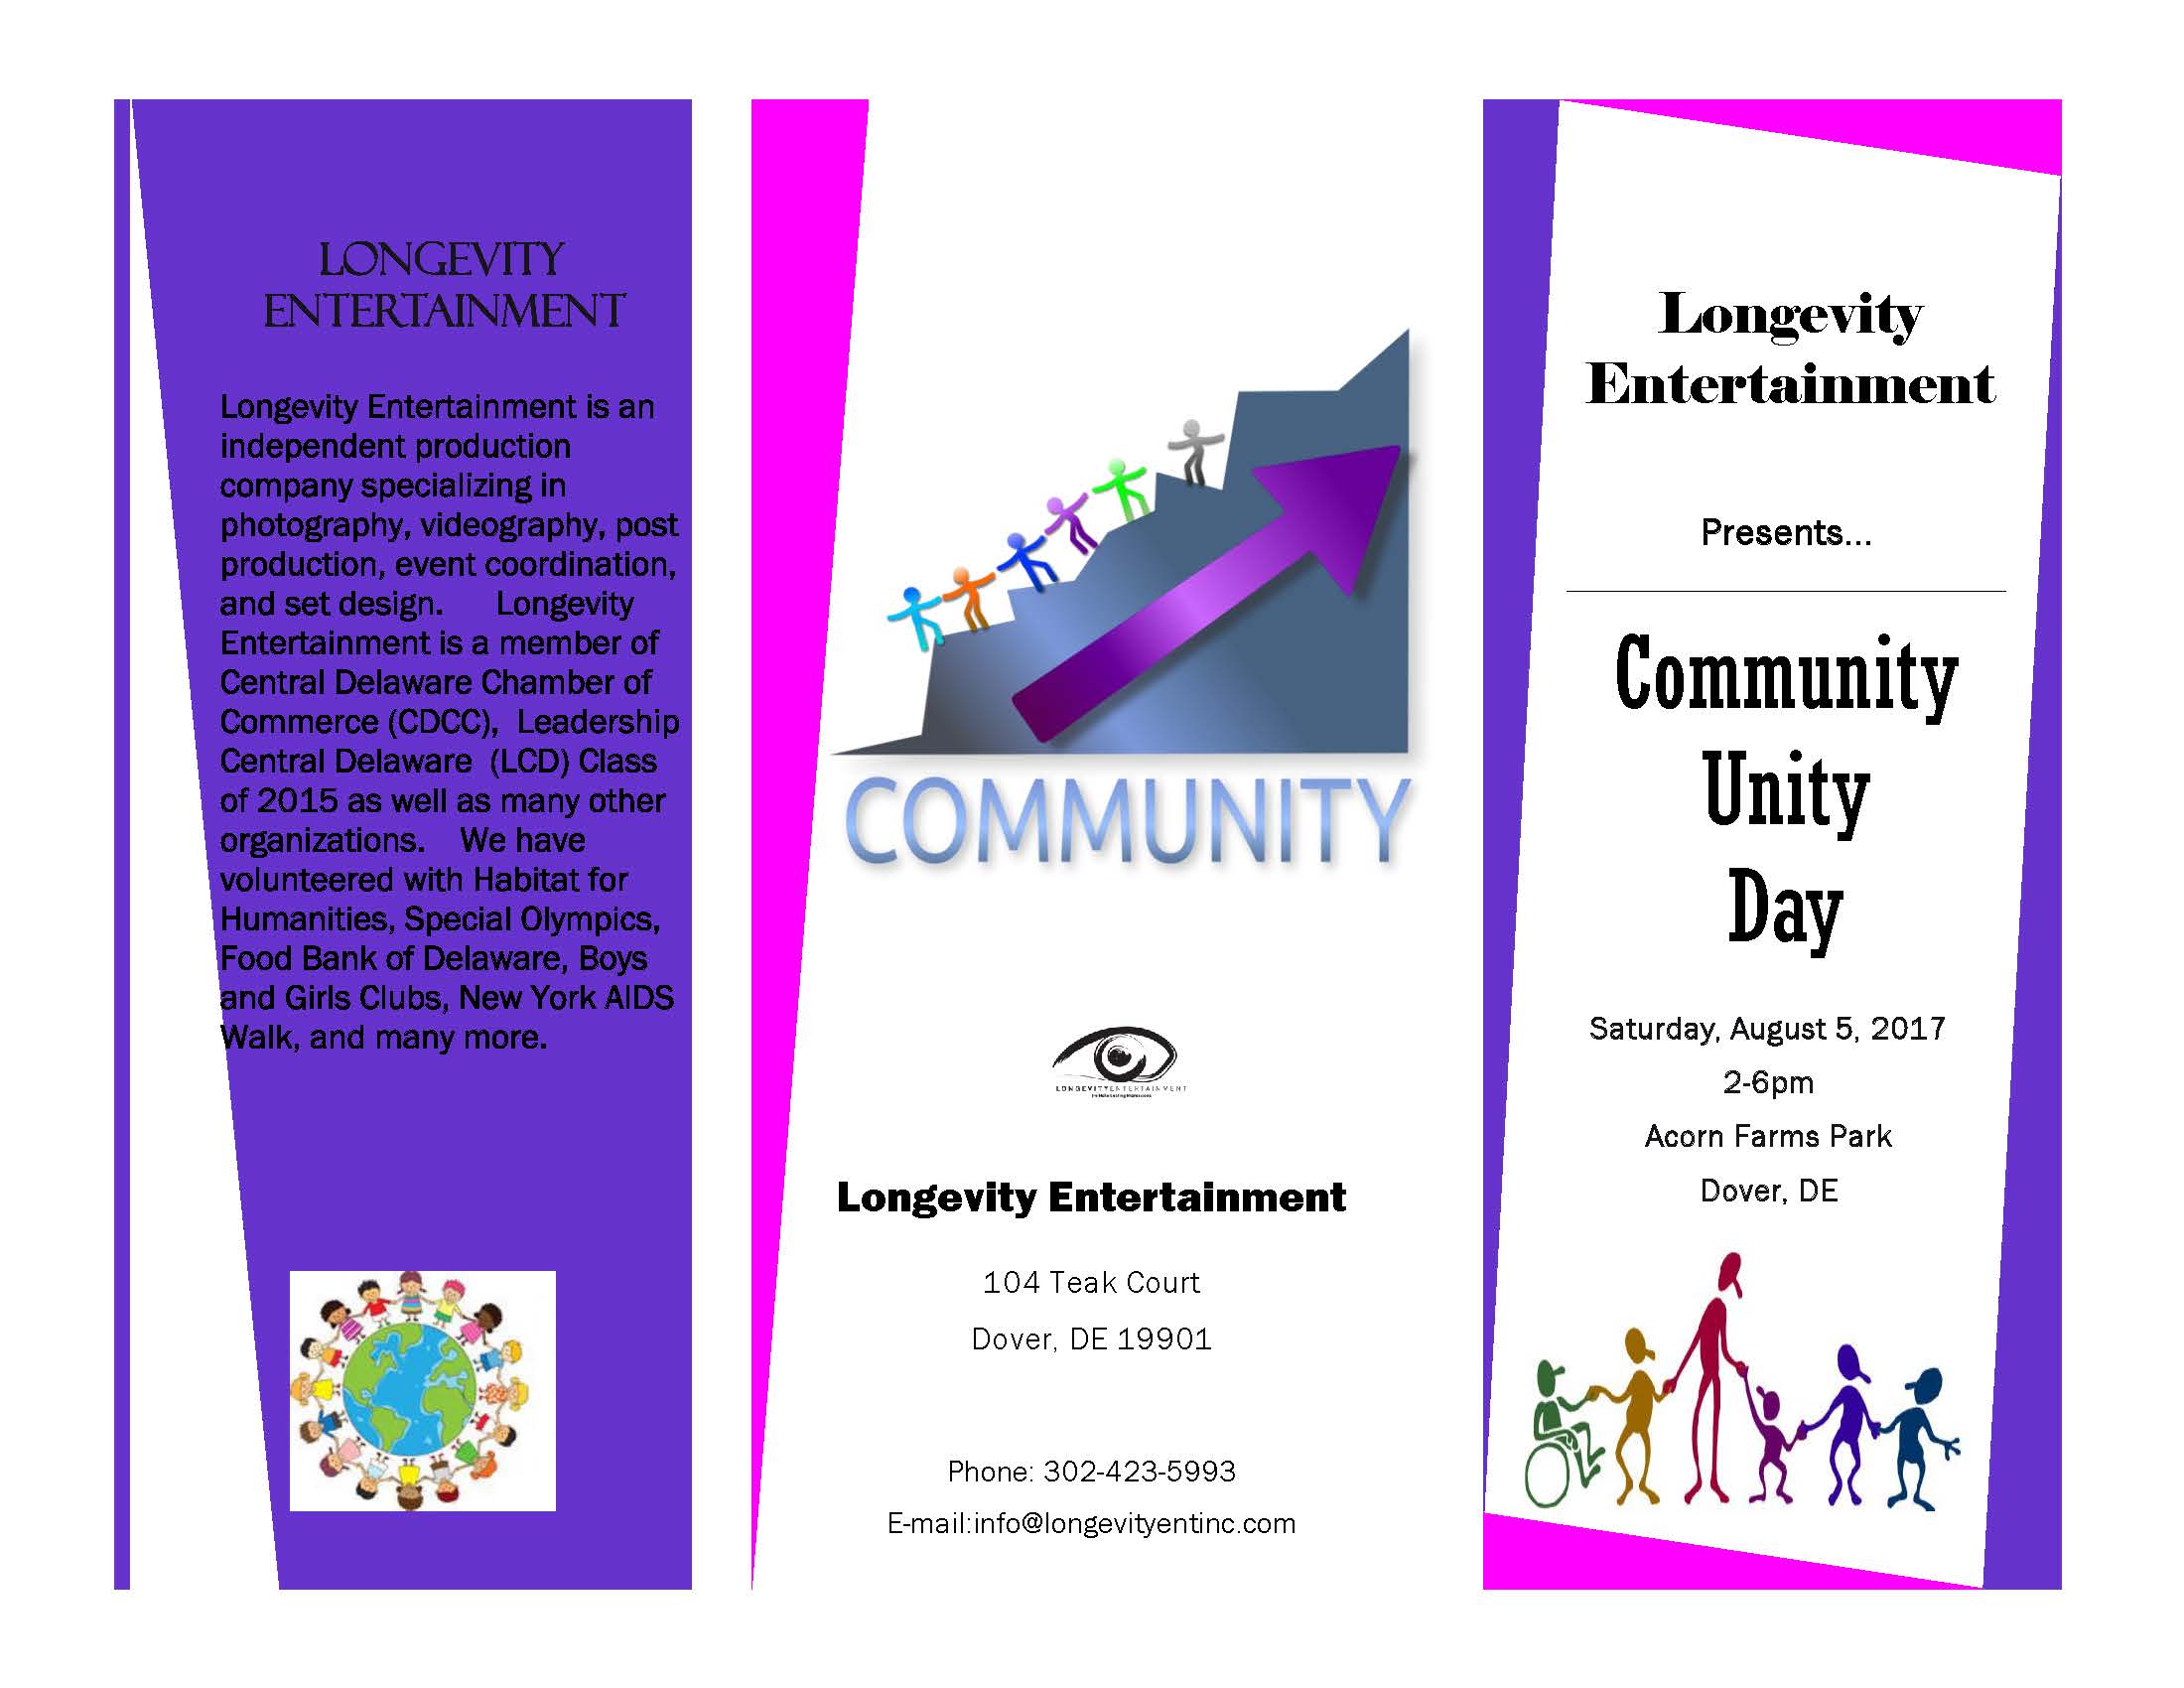 Community Unity Day hosted by Longevity Entertainment